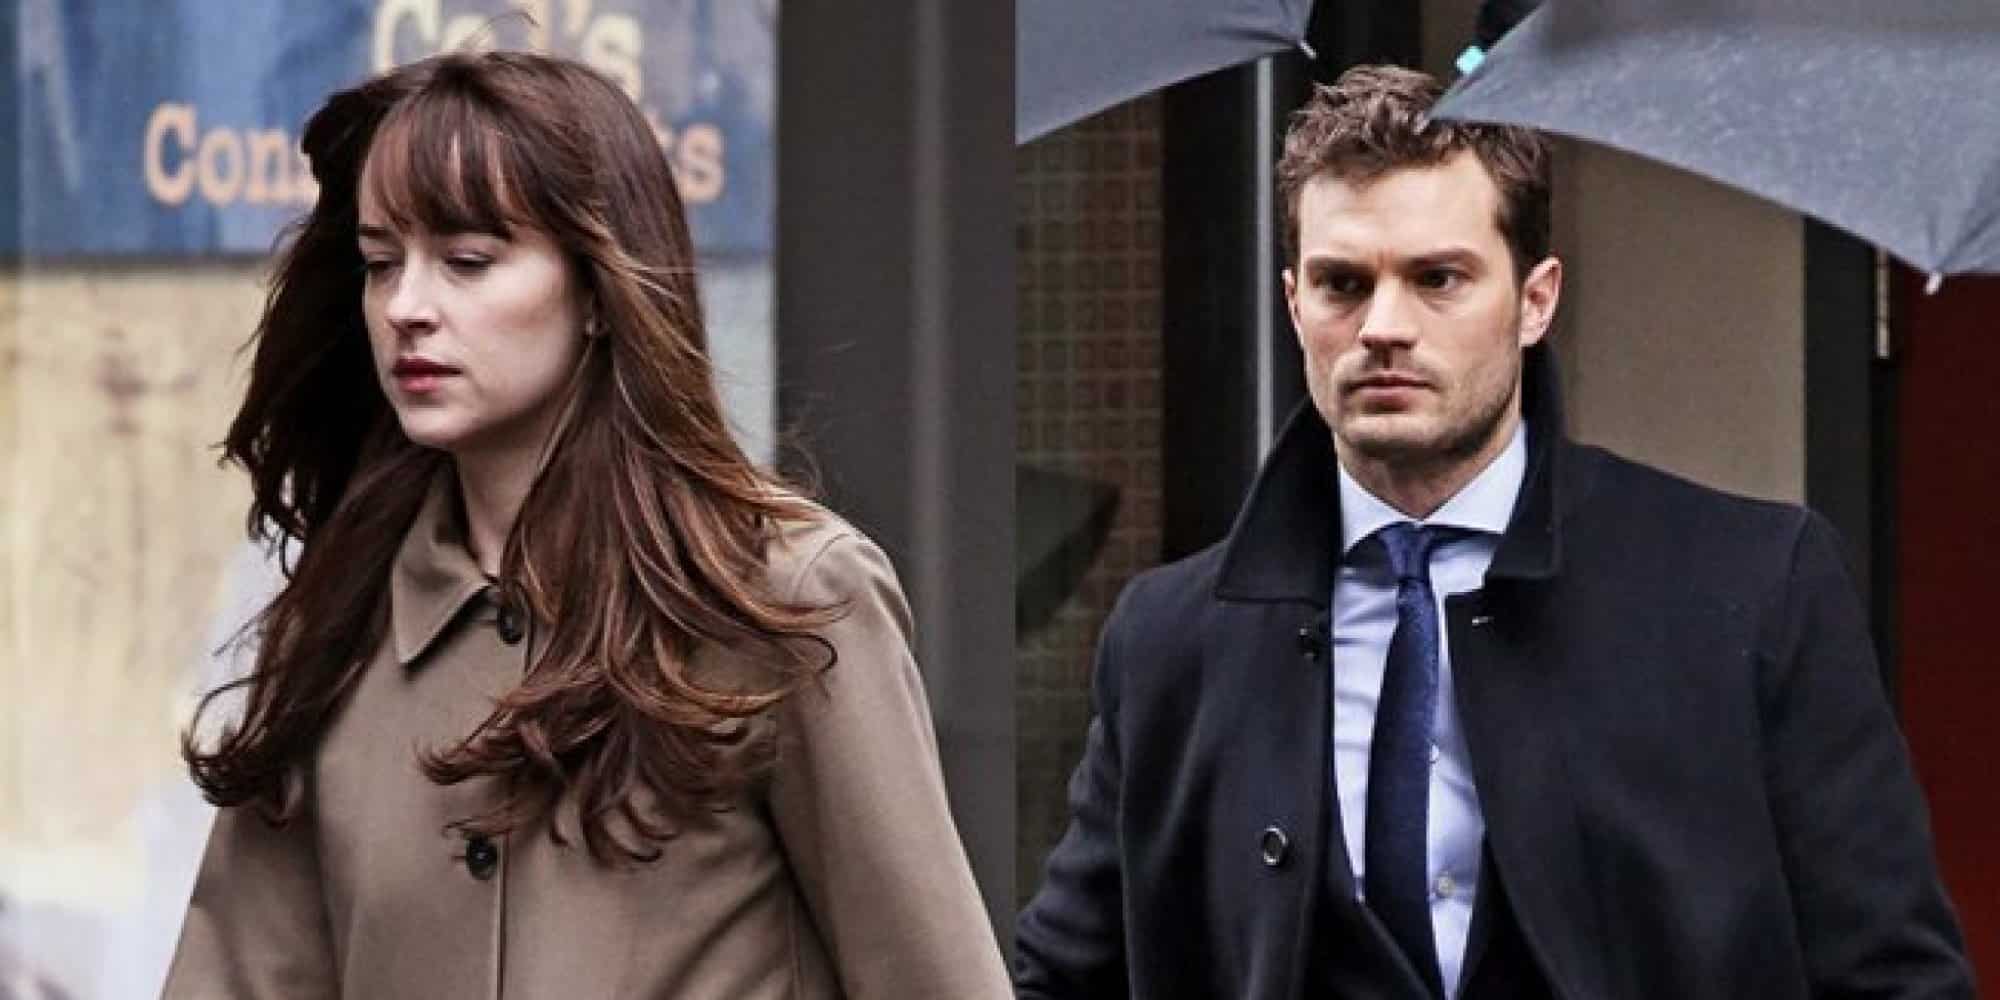 fifty shades of grey free download torrent